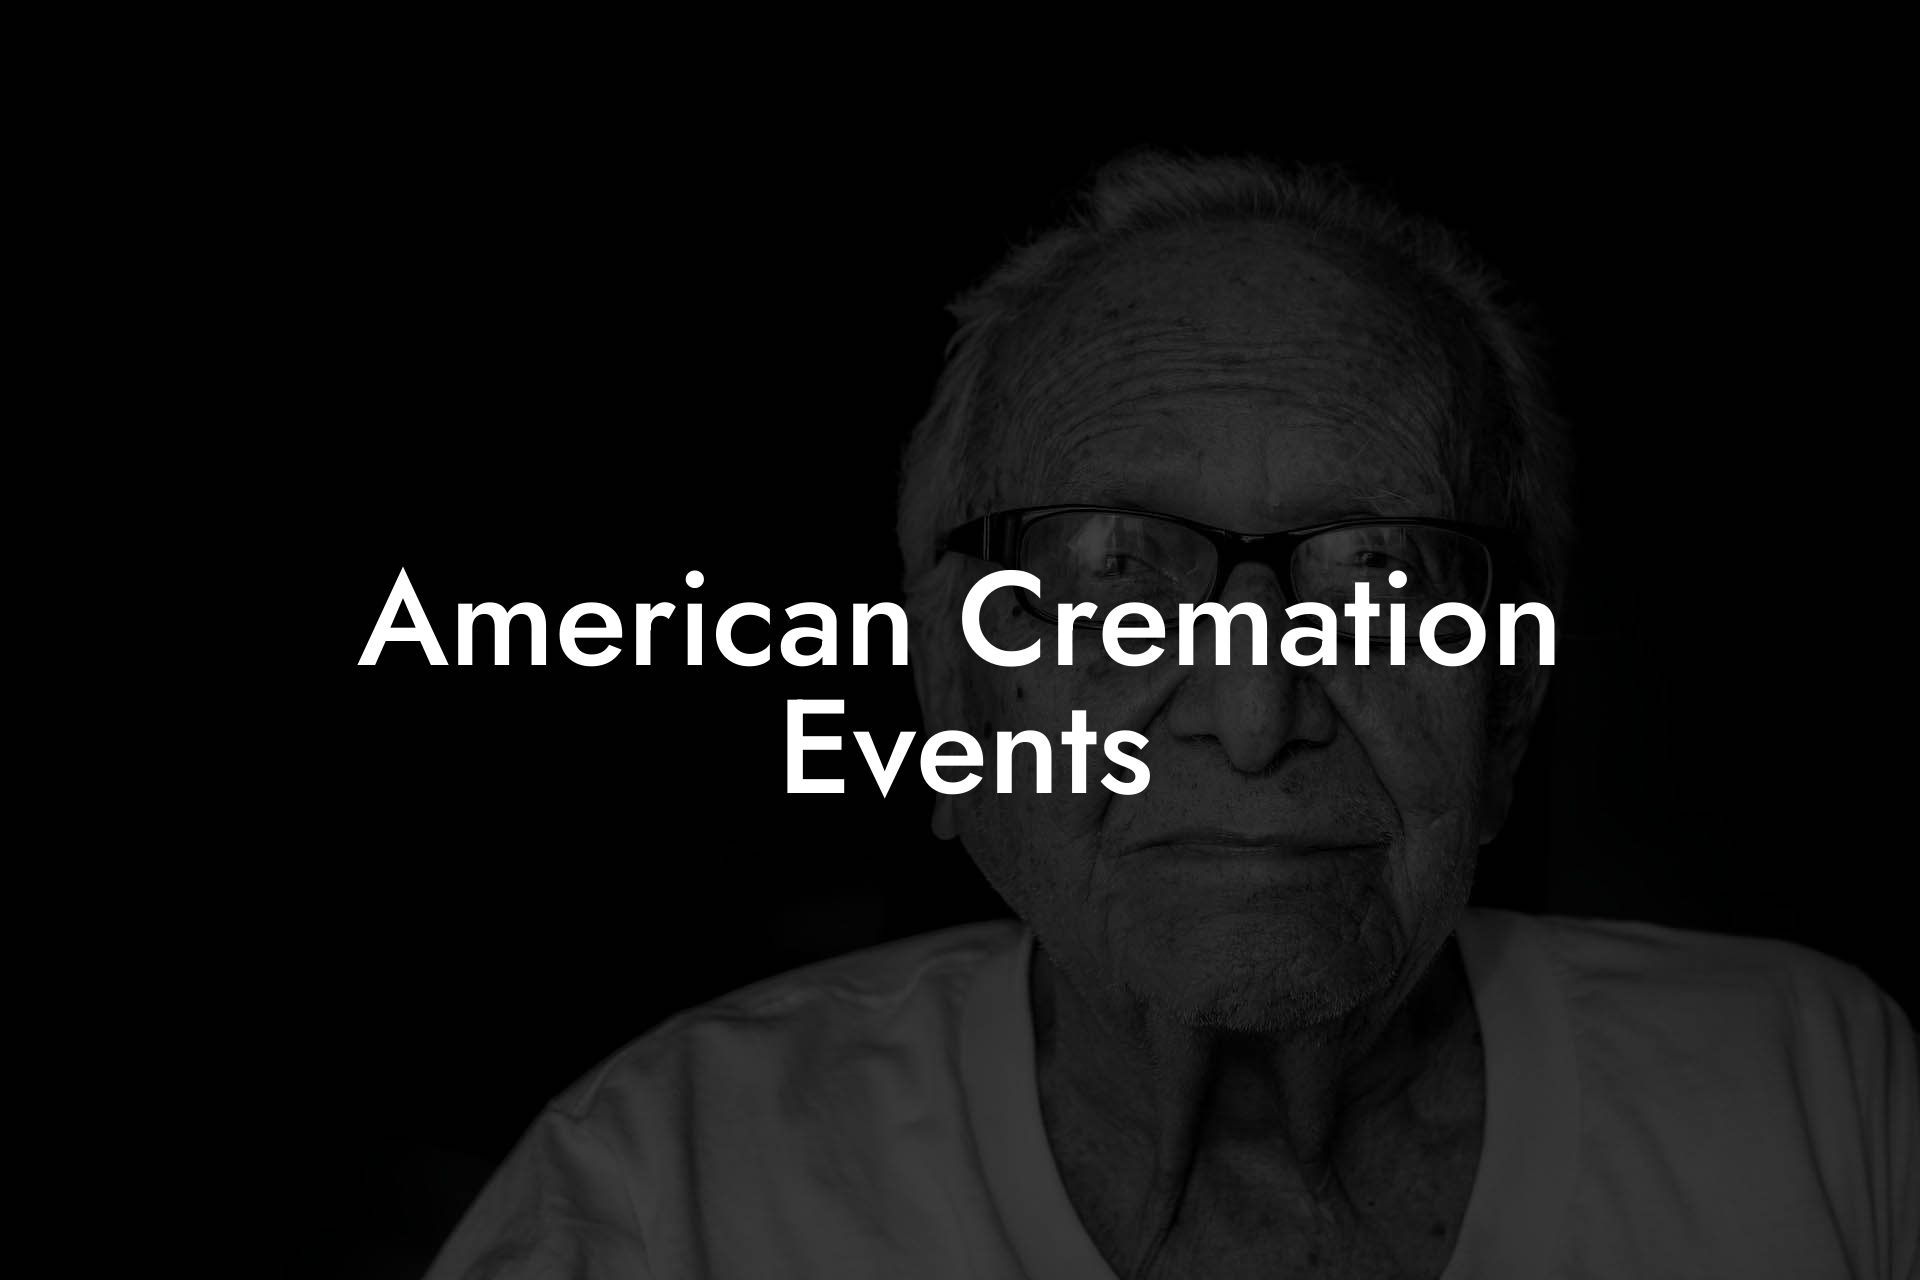 American Cremation Events